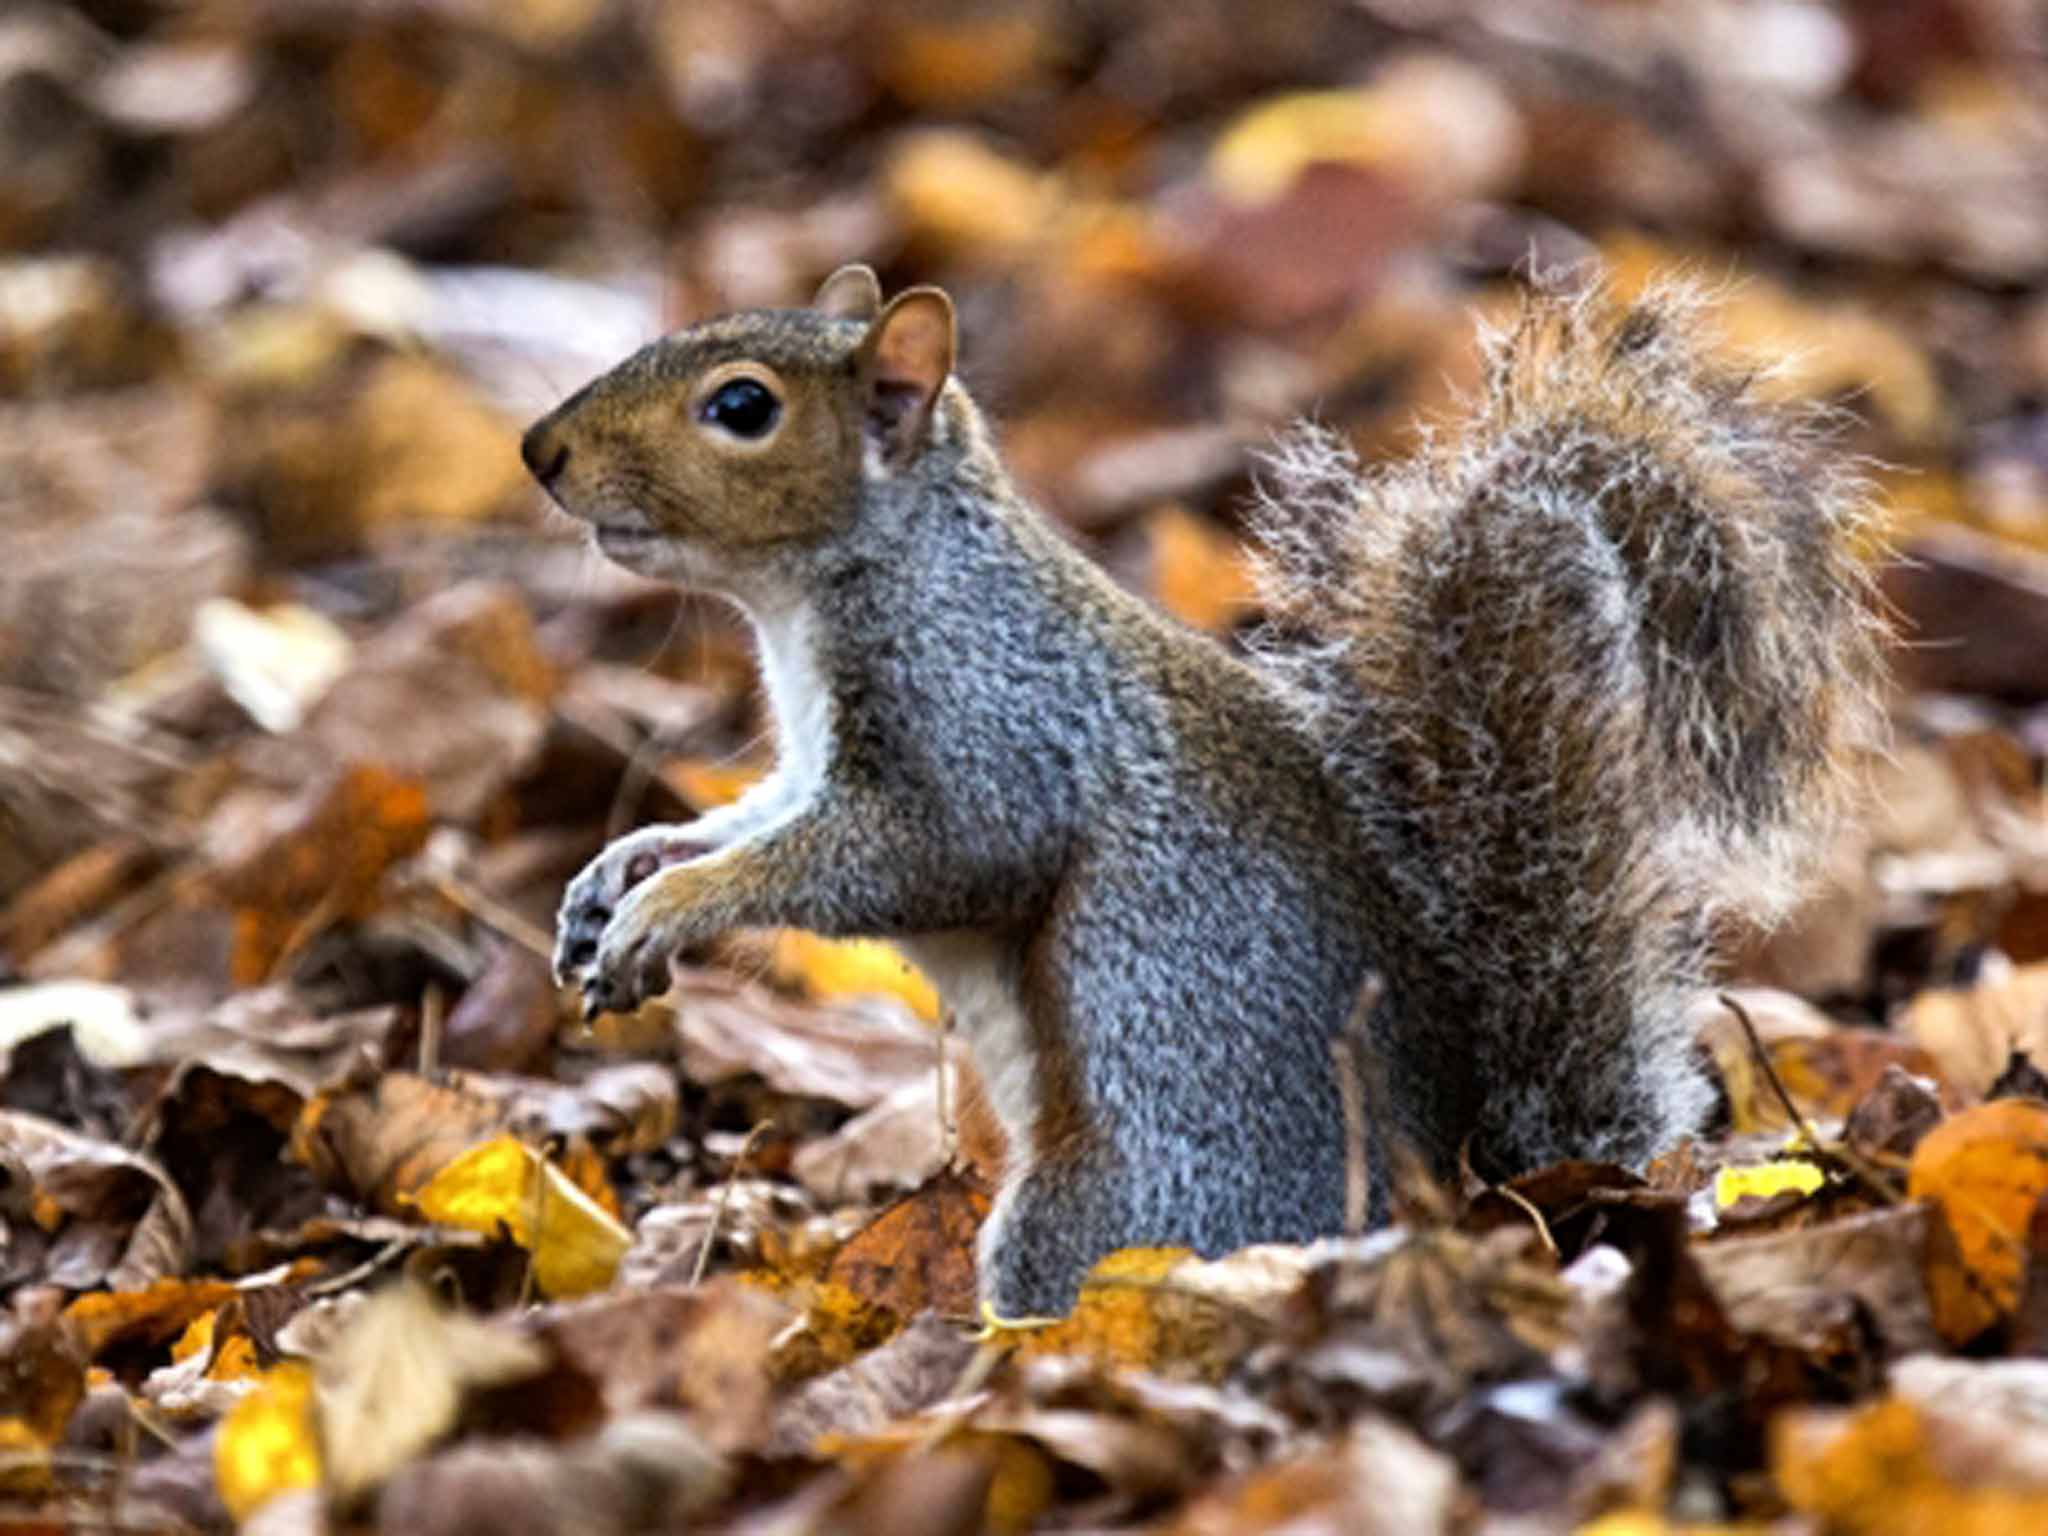 In hiding: early hibernation has caused a squirrel shortage